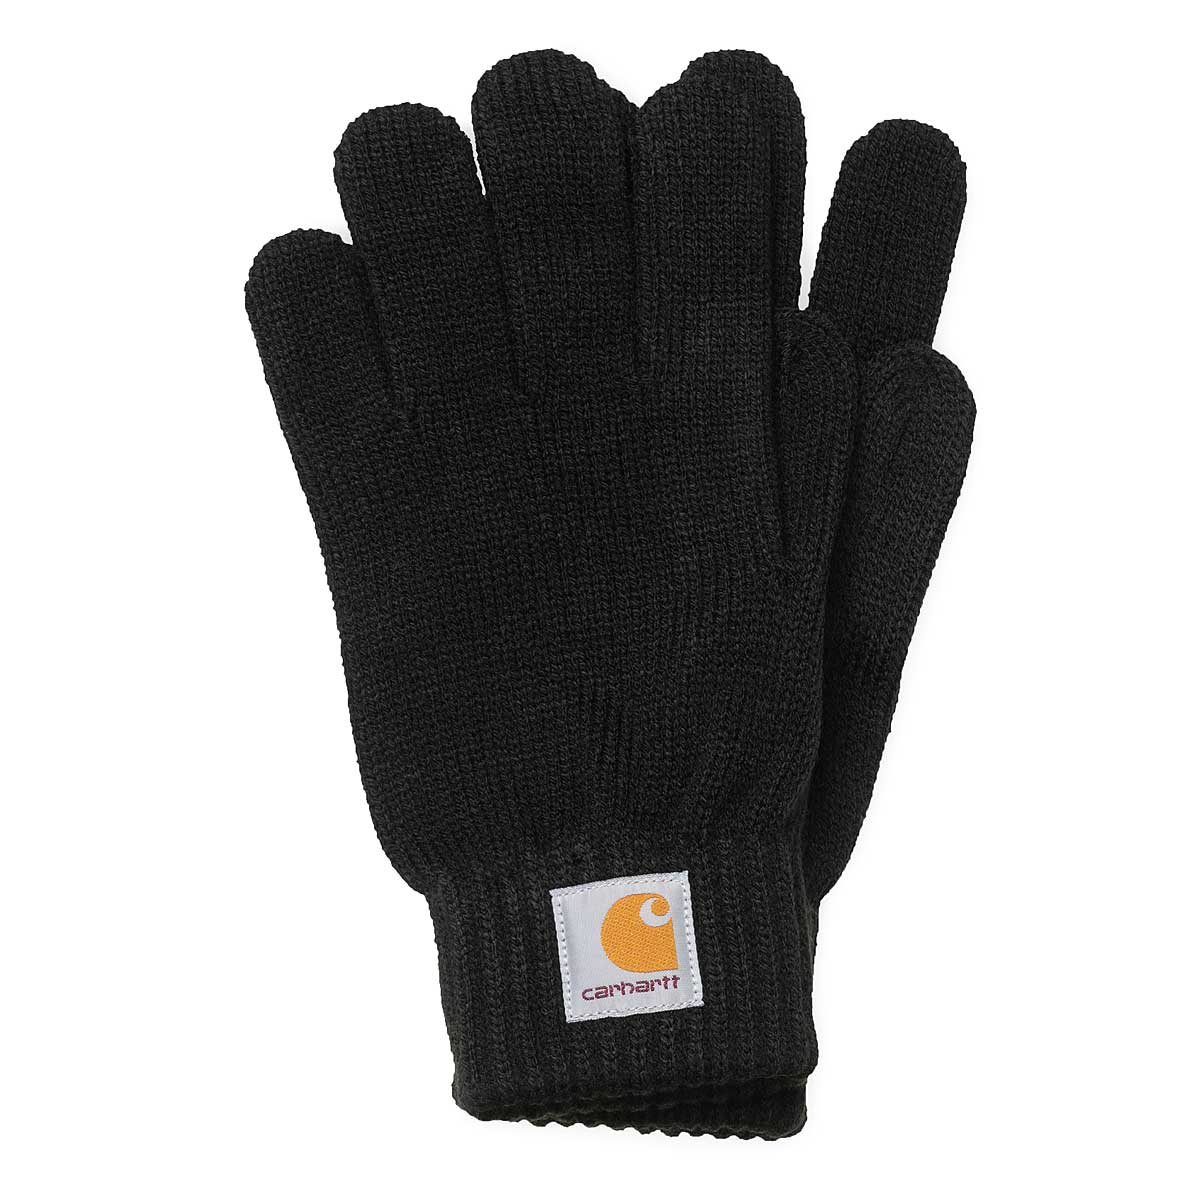 Carhartt Wip Watch Gloves, Black product